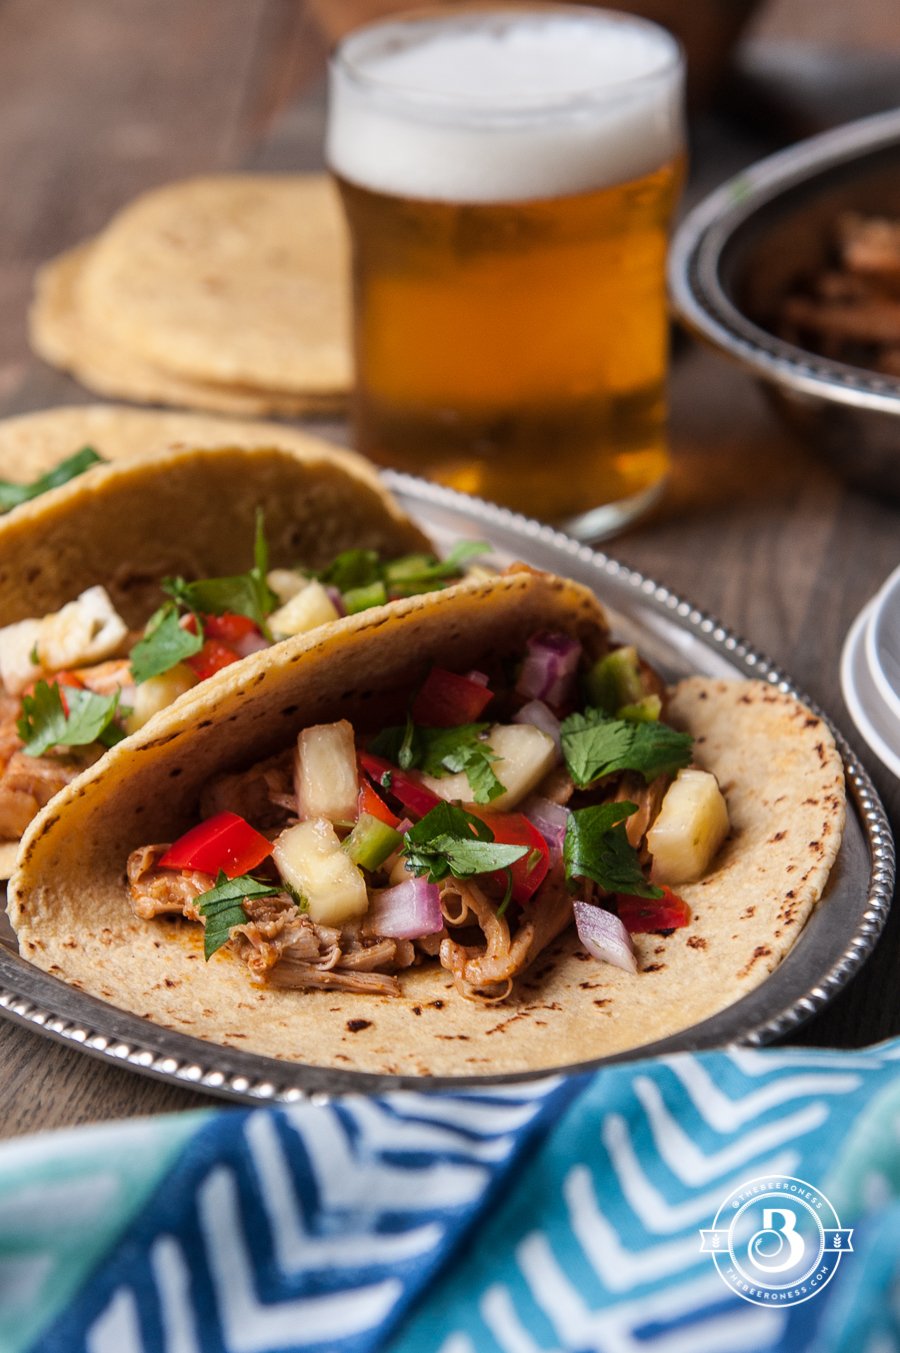 Chili Beer Chicken Tacos with Pineapple Salsa2